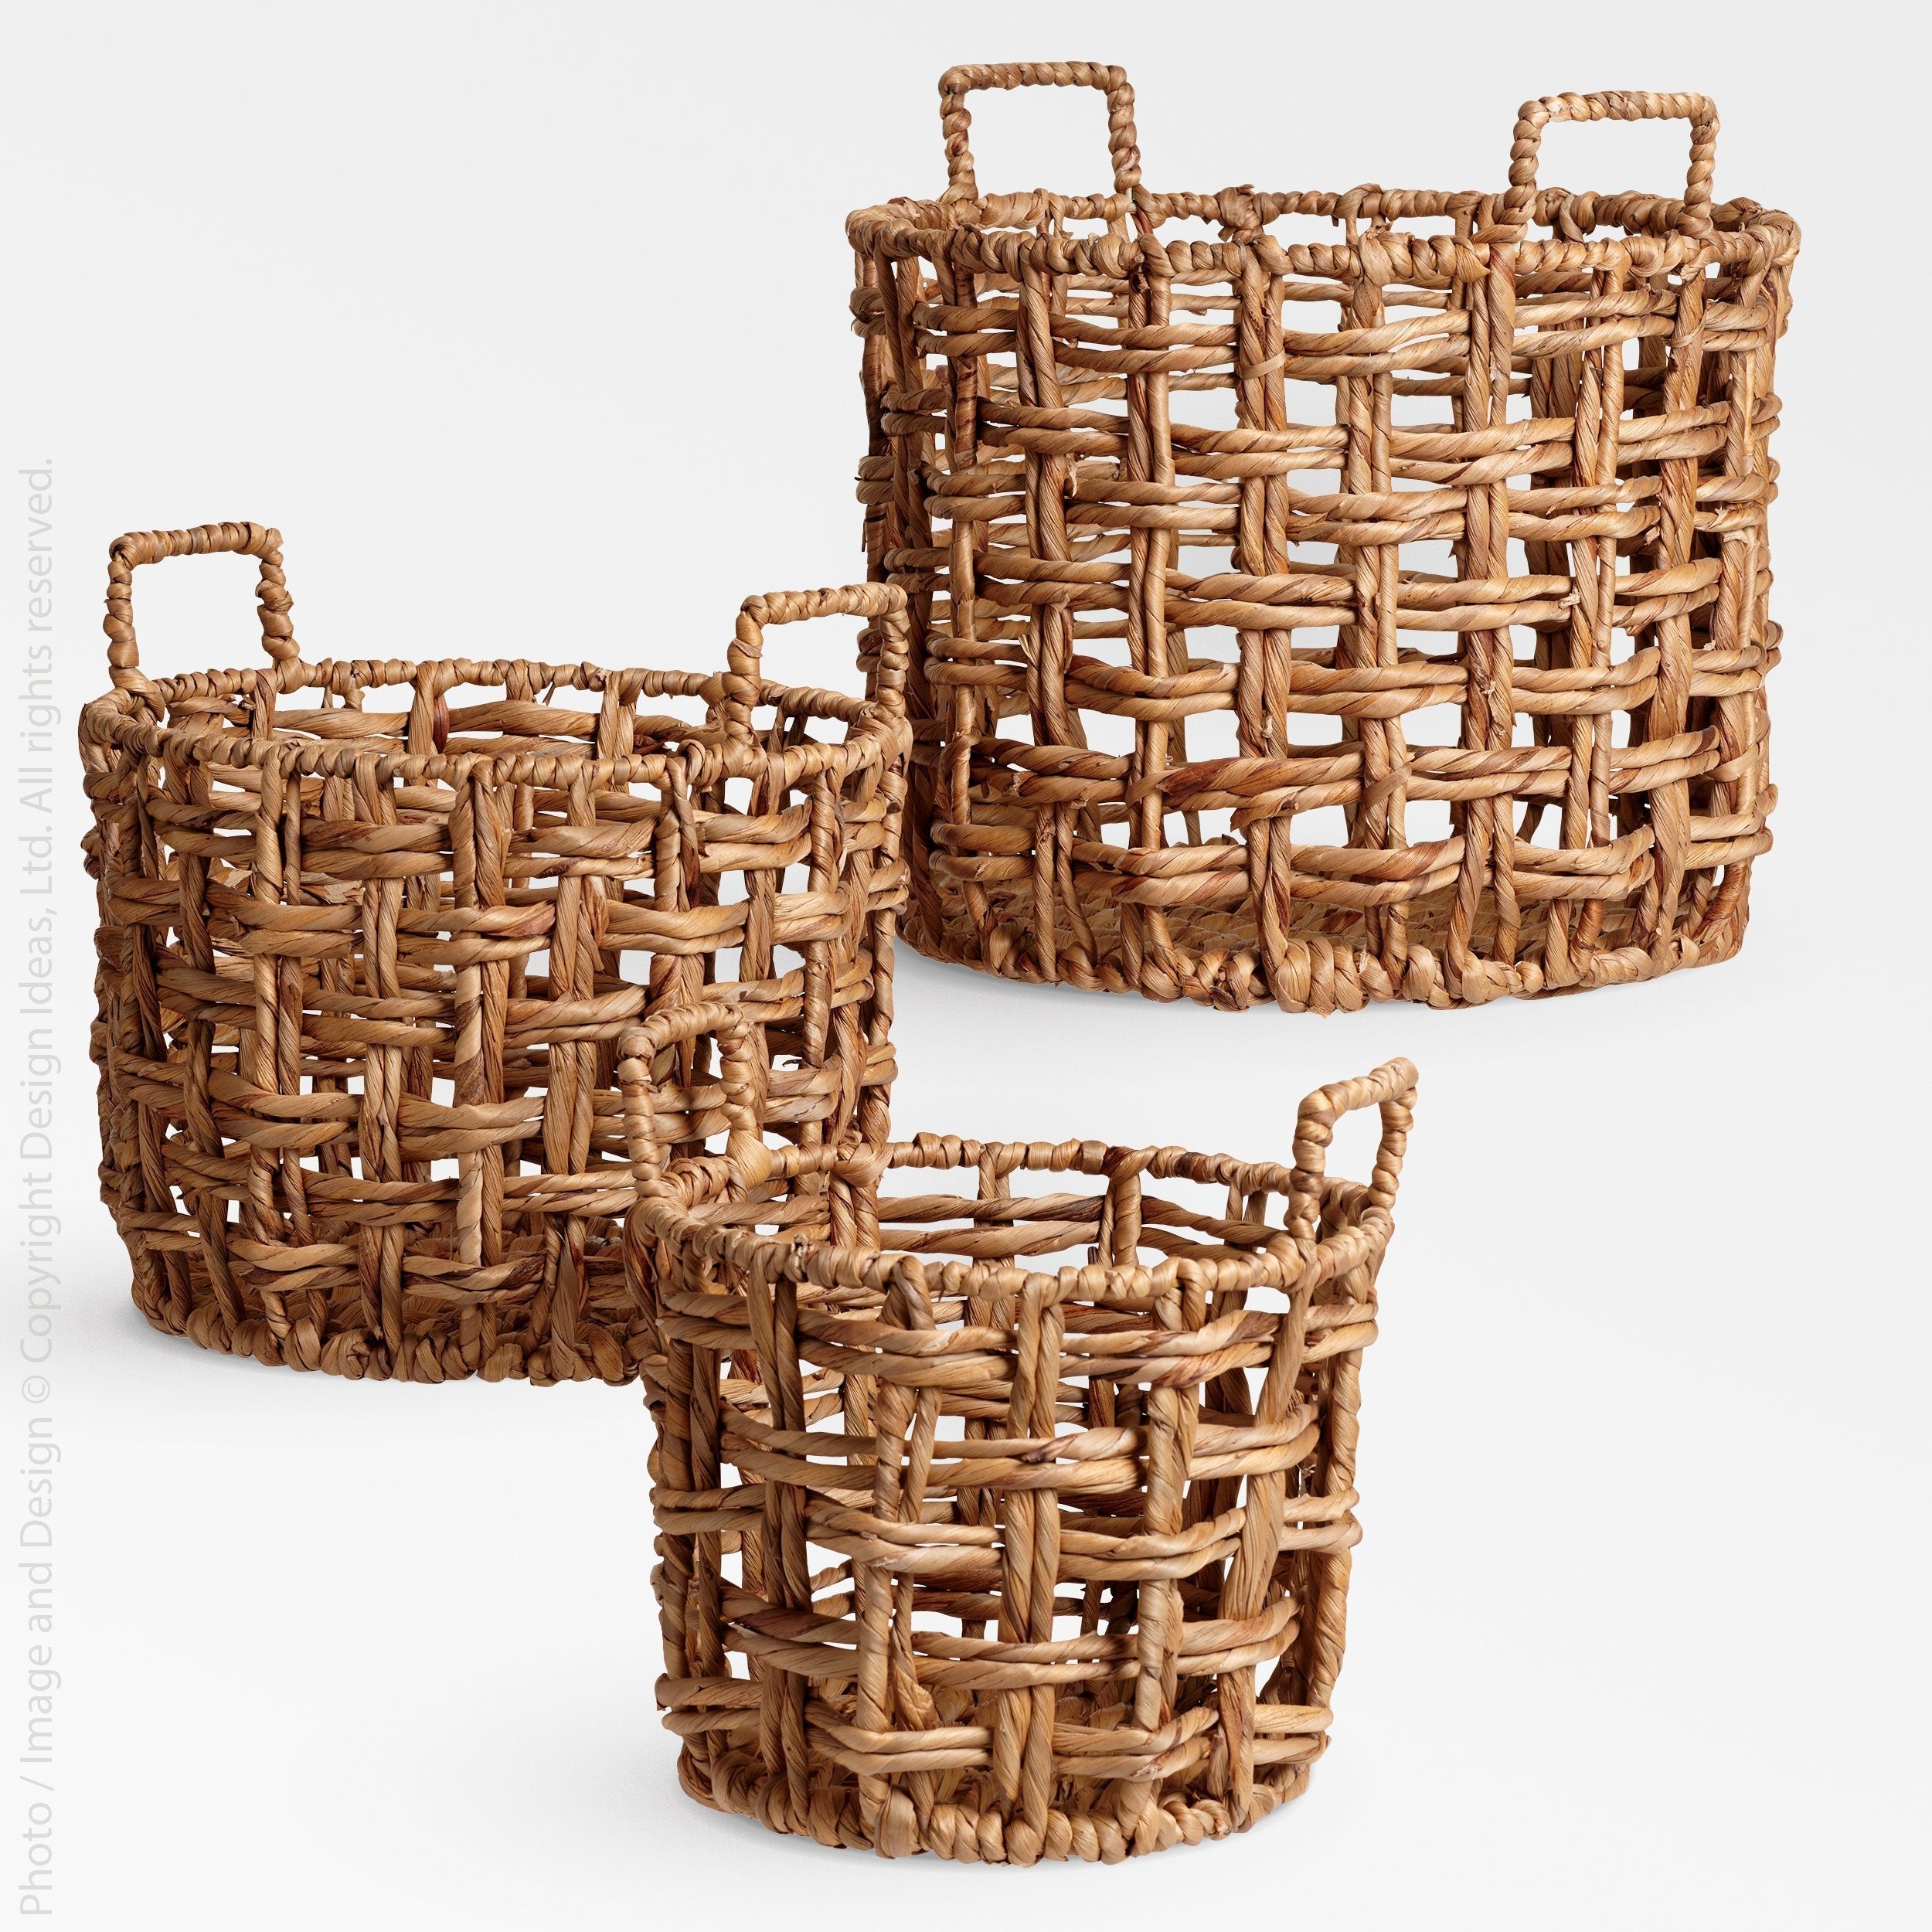 Lucia Baskets ( Set of 3)